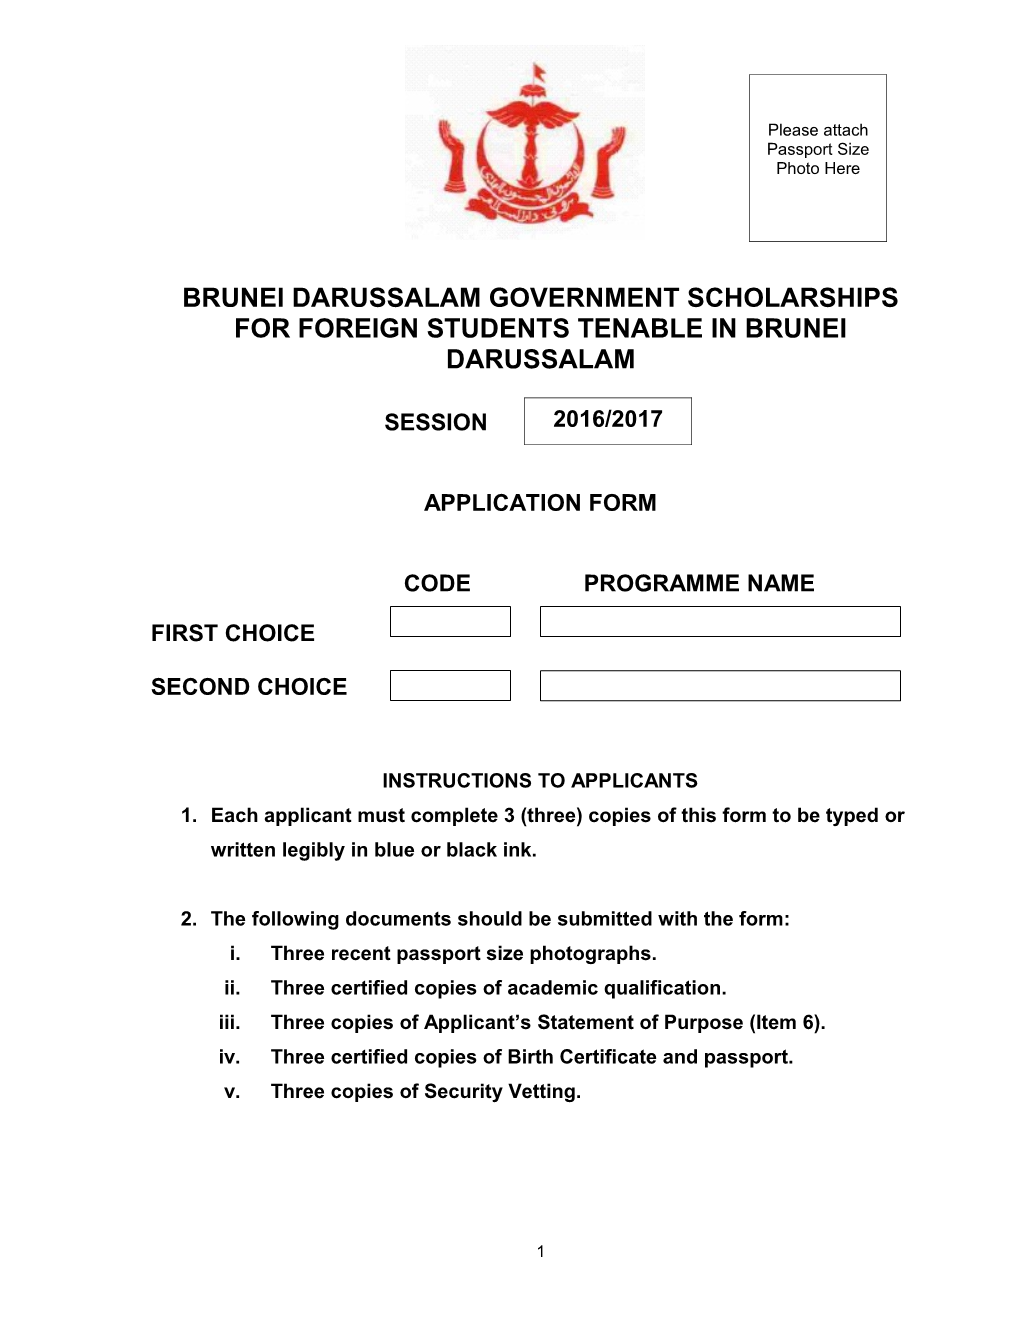 Brunei Darussalam Government Scholarships for Foreign Students Tenable in Brunei Darussalam